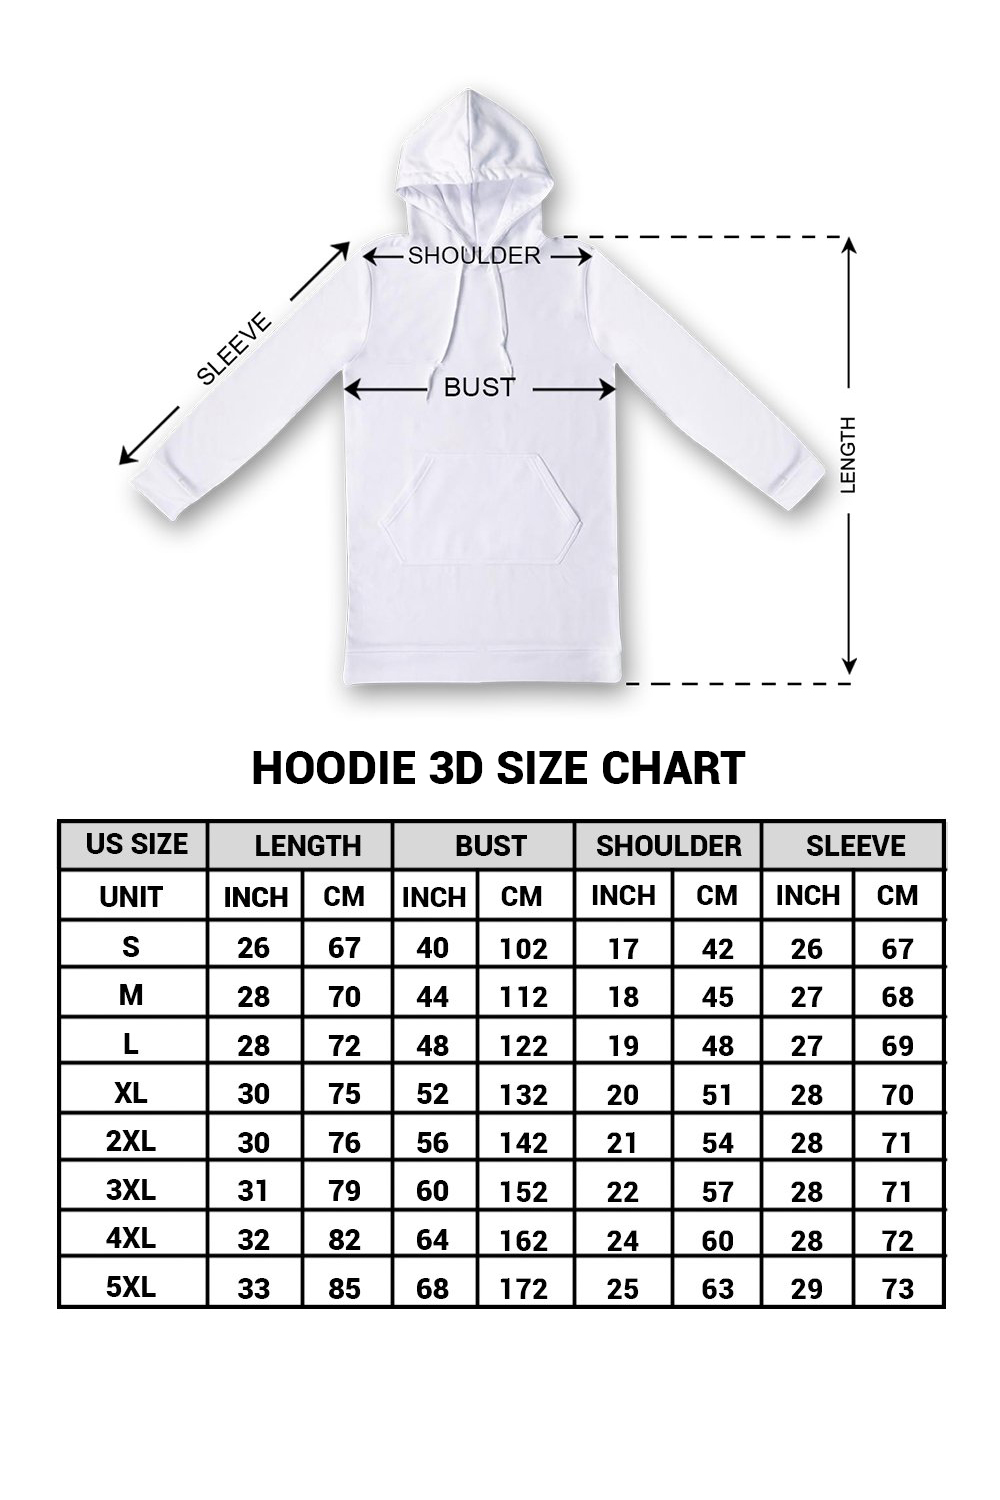 Hoodie 3D size chart